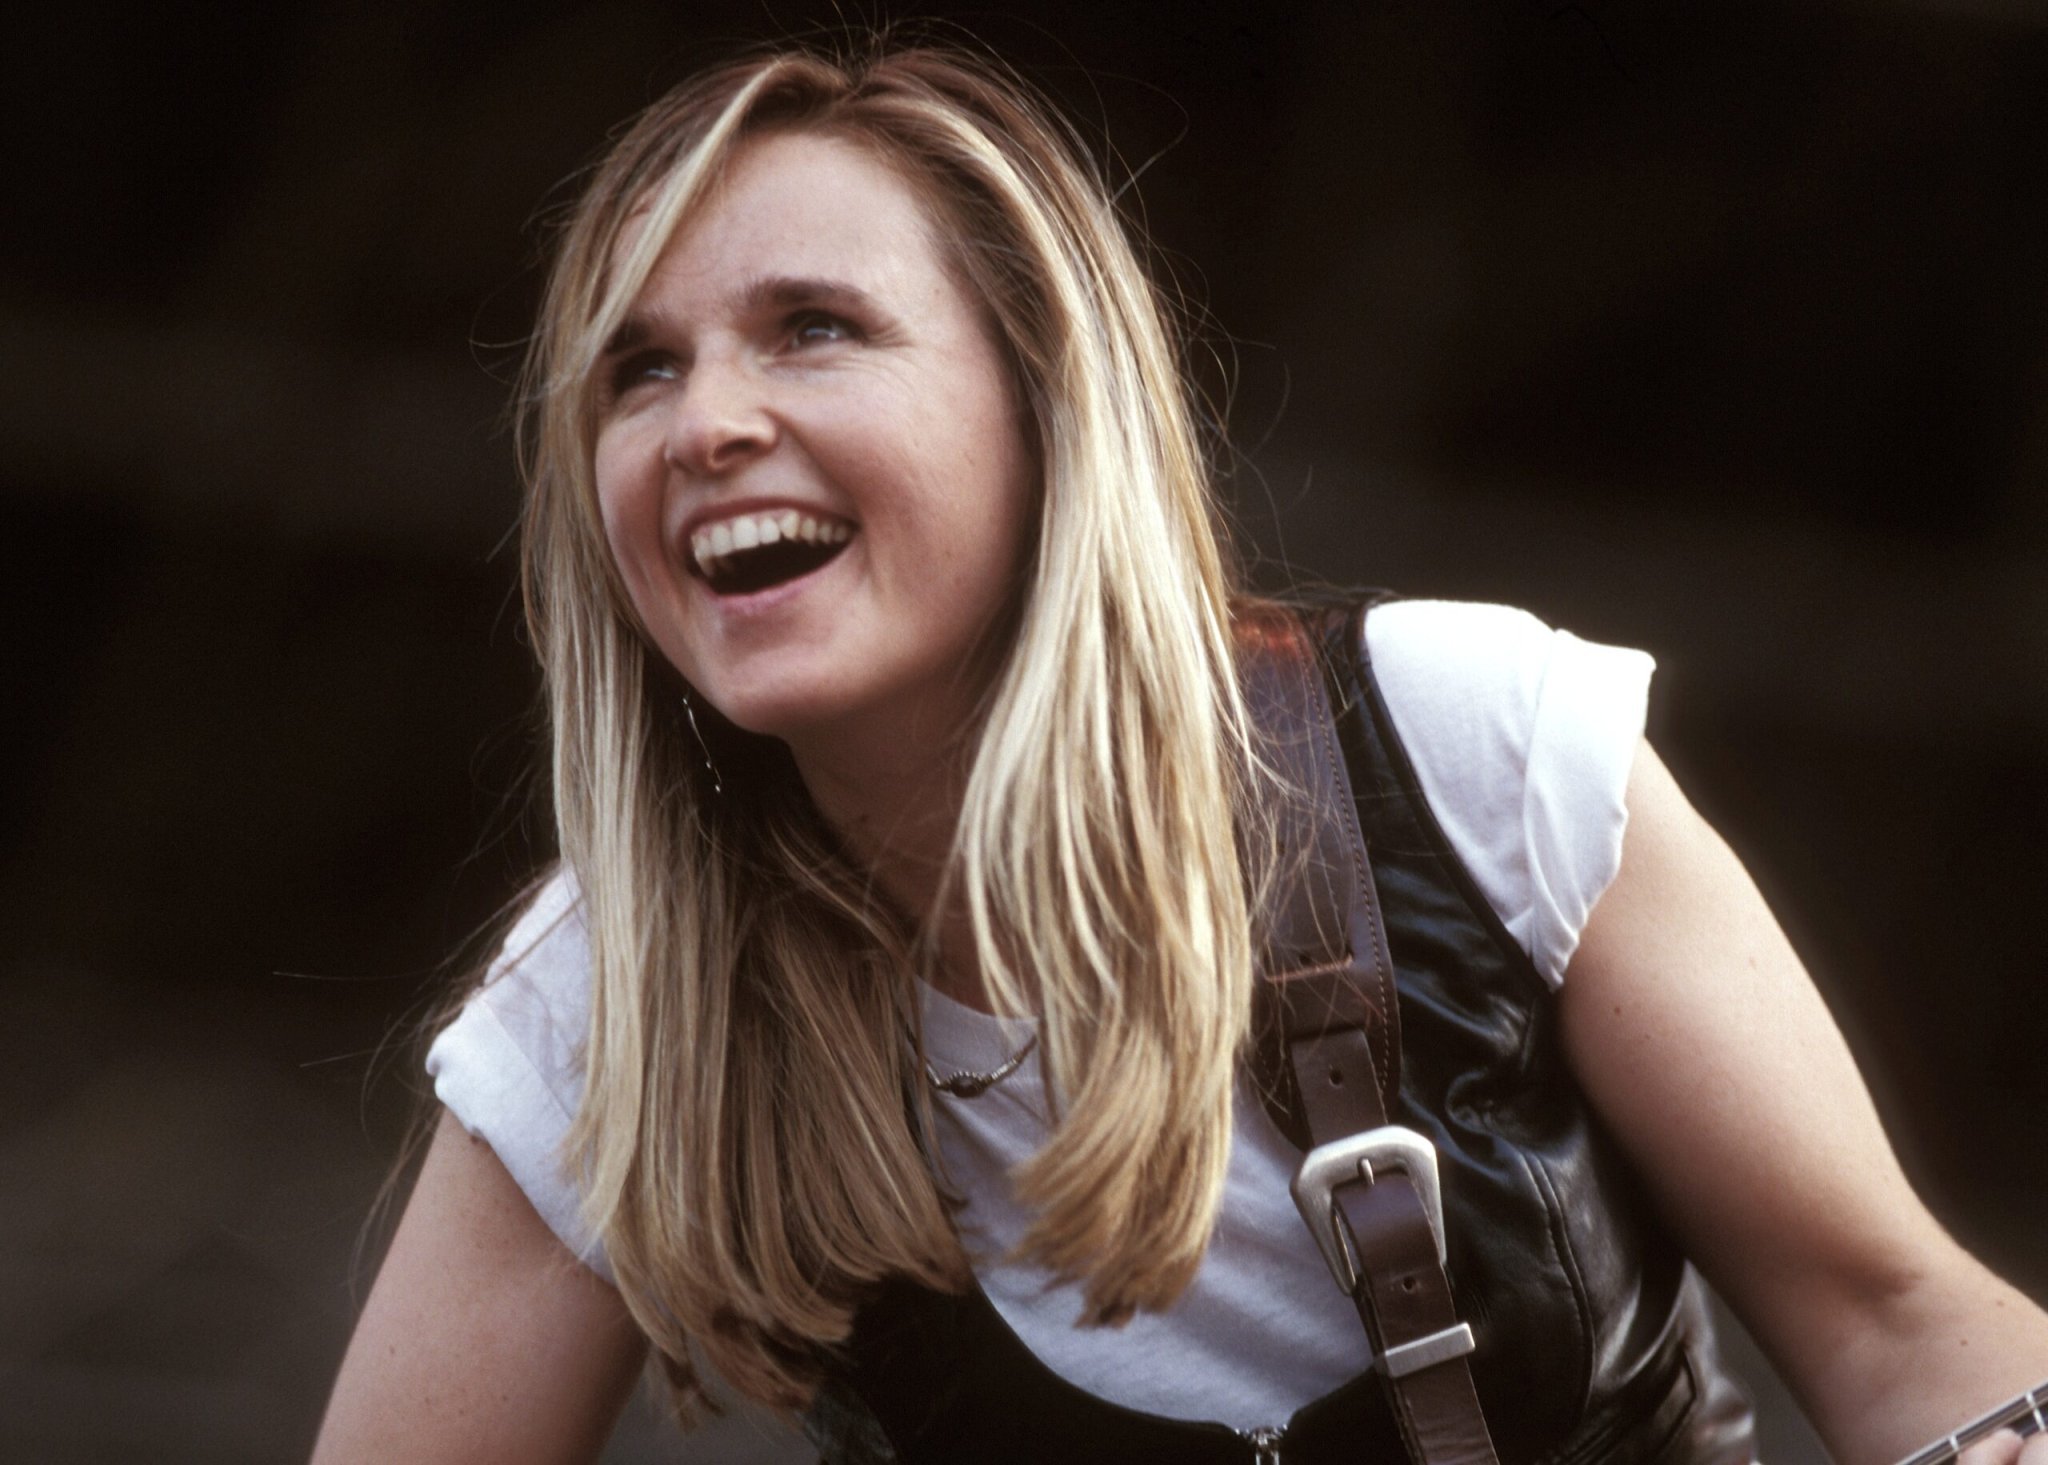 A record exec asked Melissa Etheridge 'What are we gonna do about the gay thing'